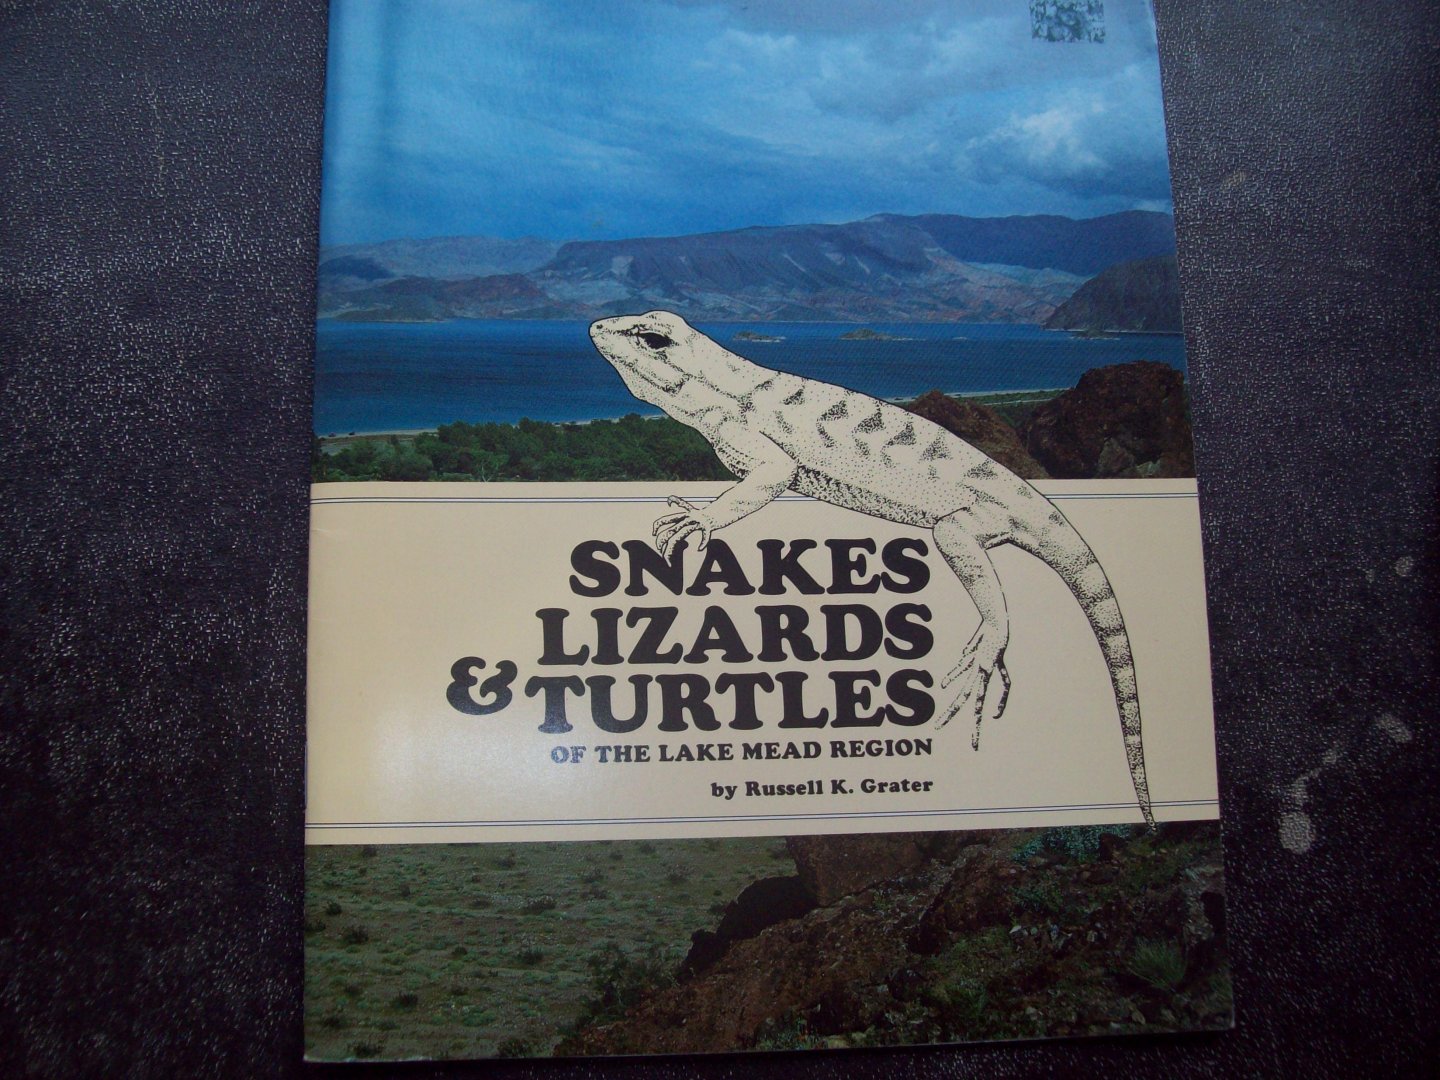 Russell K. Grater - "Snakes, Lizards & Turtles" Of the Lake Mead Region.